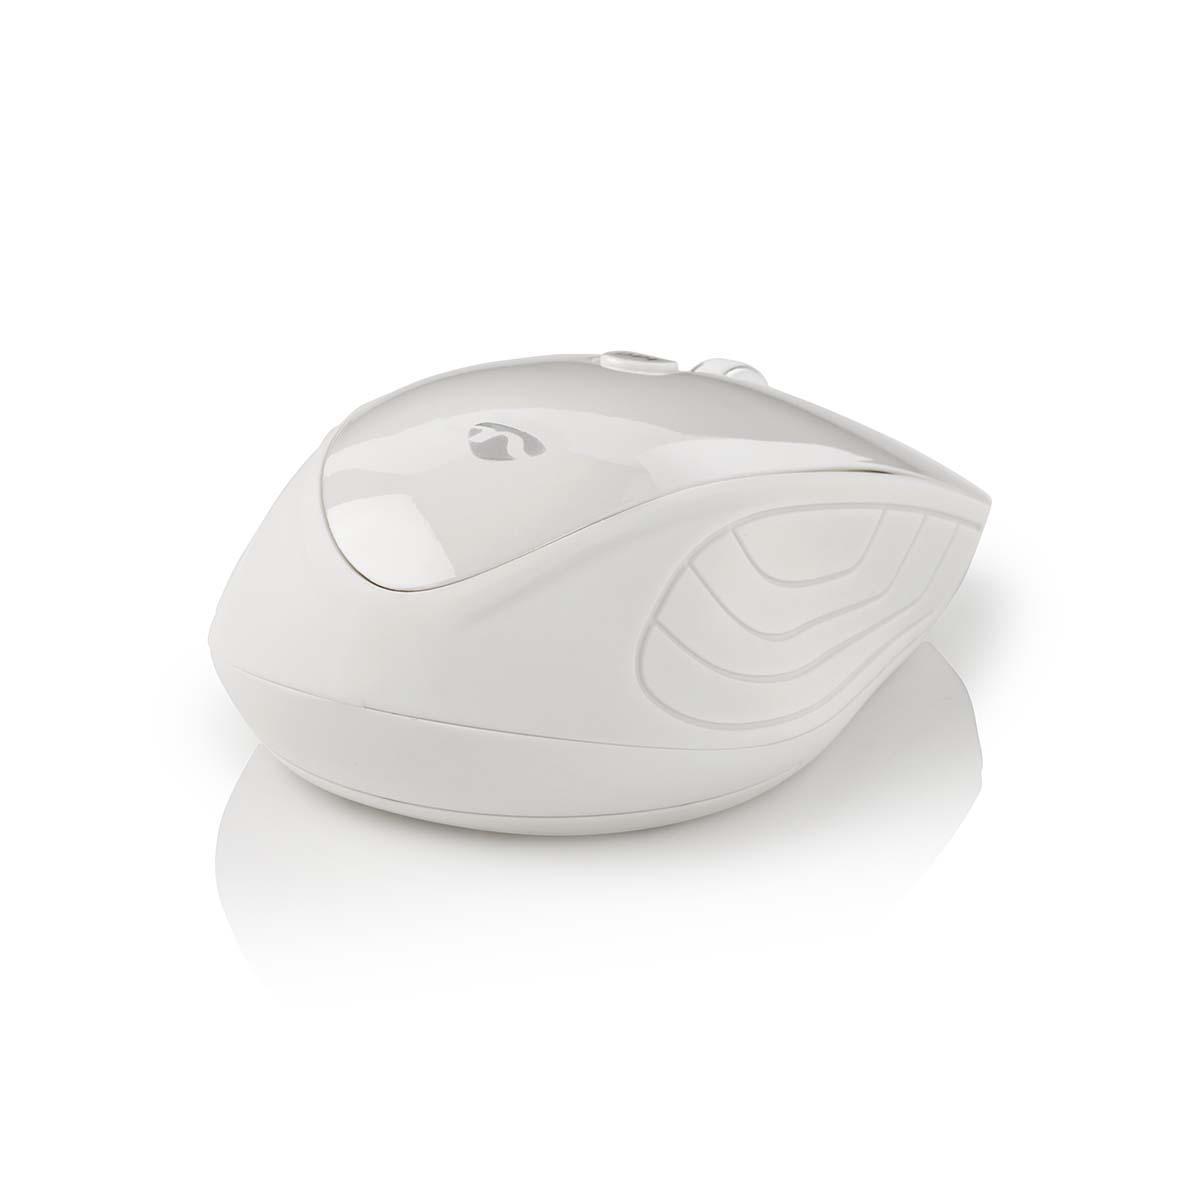 NEDIS MSWS400WT Mouse, Weiss